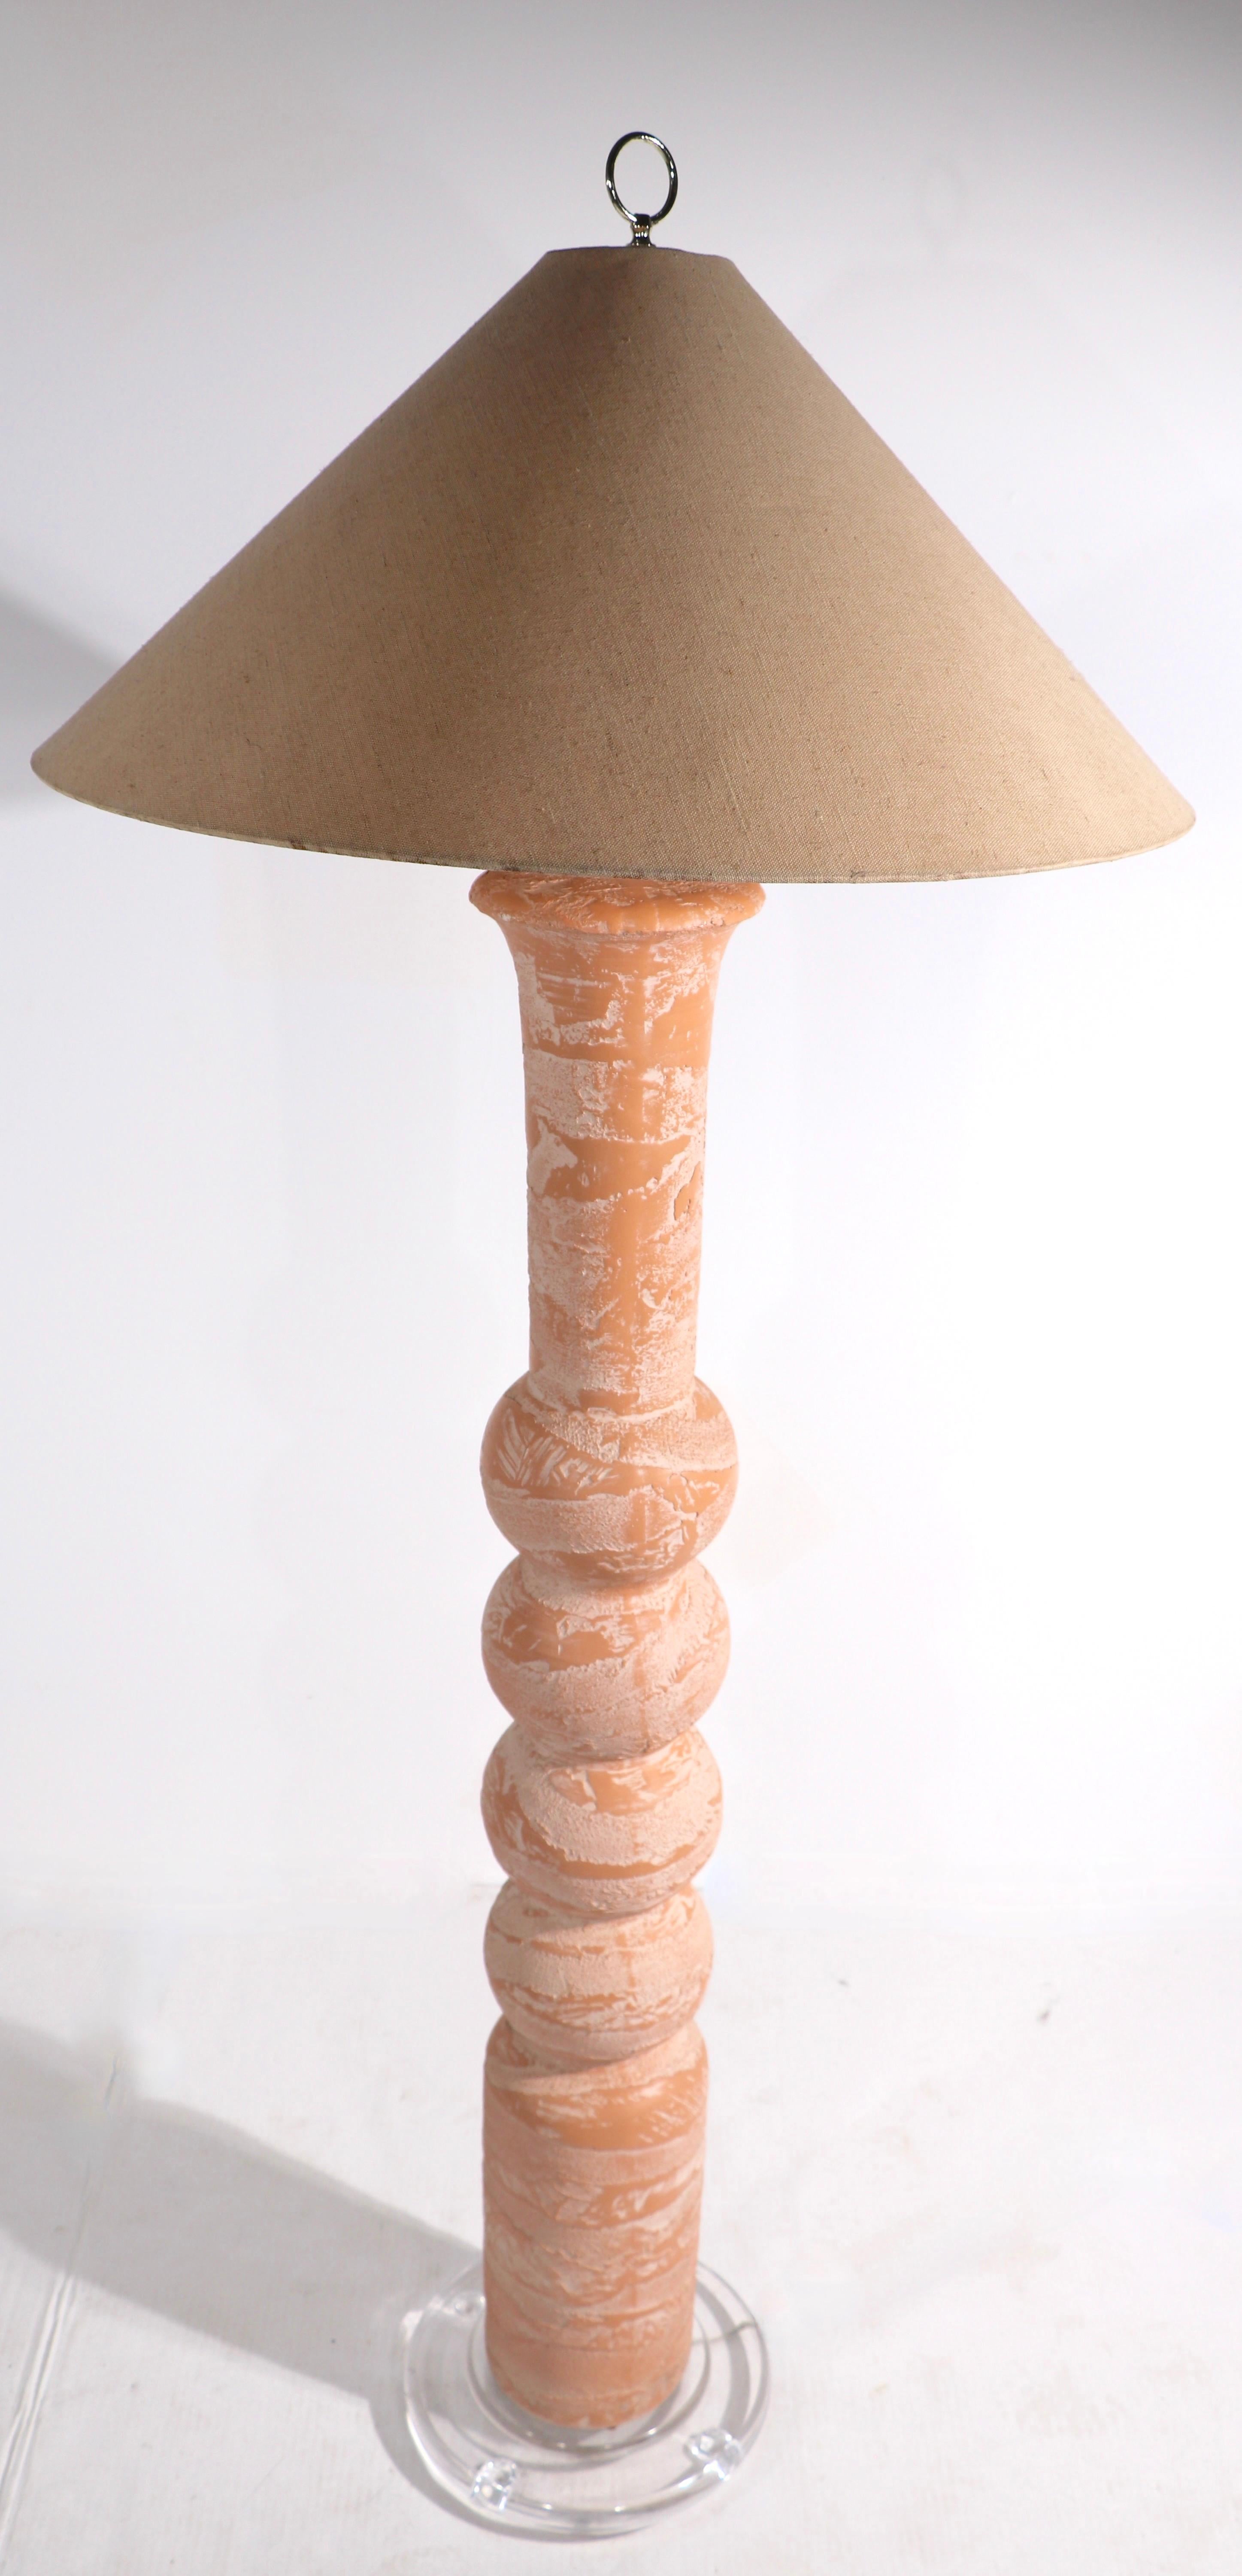 Impressive 1980's plaster floor lamp with thick lucite disk form base. The lamp has a textured peach colored surface of cast plaster, the shade is included, but shows some imperfections. 
 Shade dimensions 25.5 Diameter x 11 height inches. Base 12